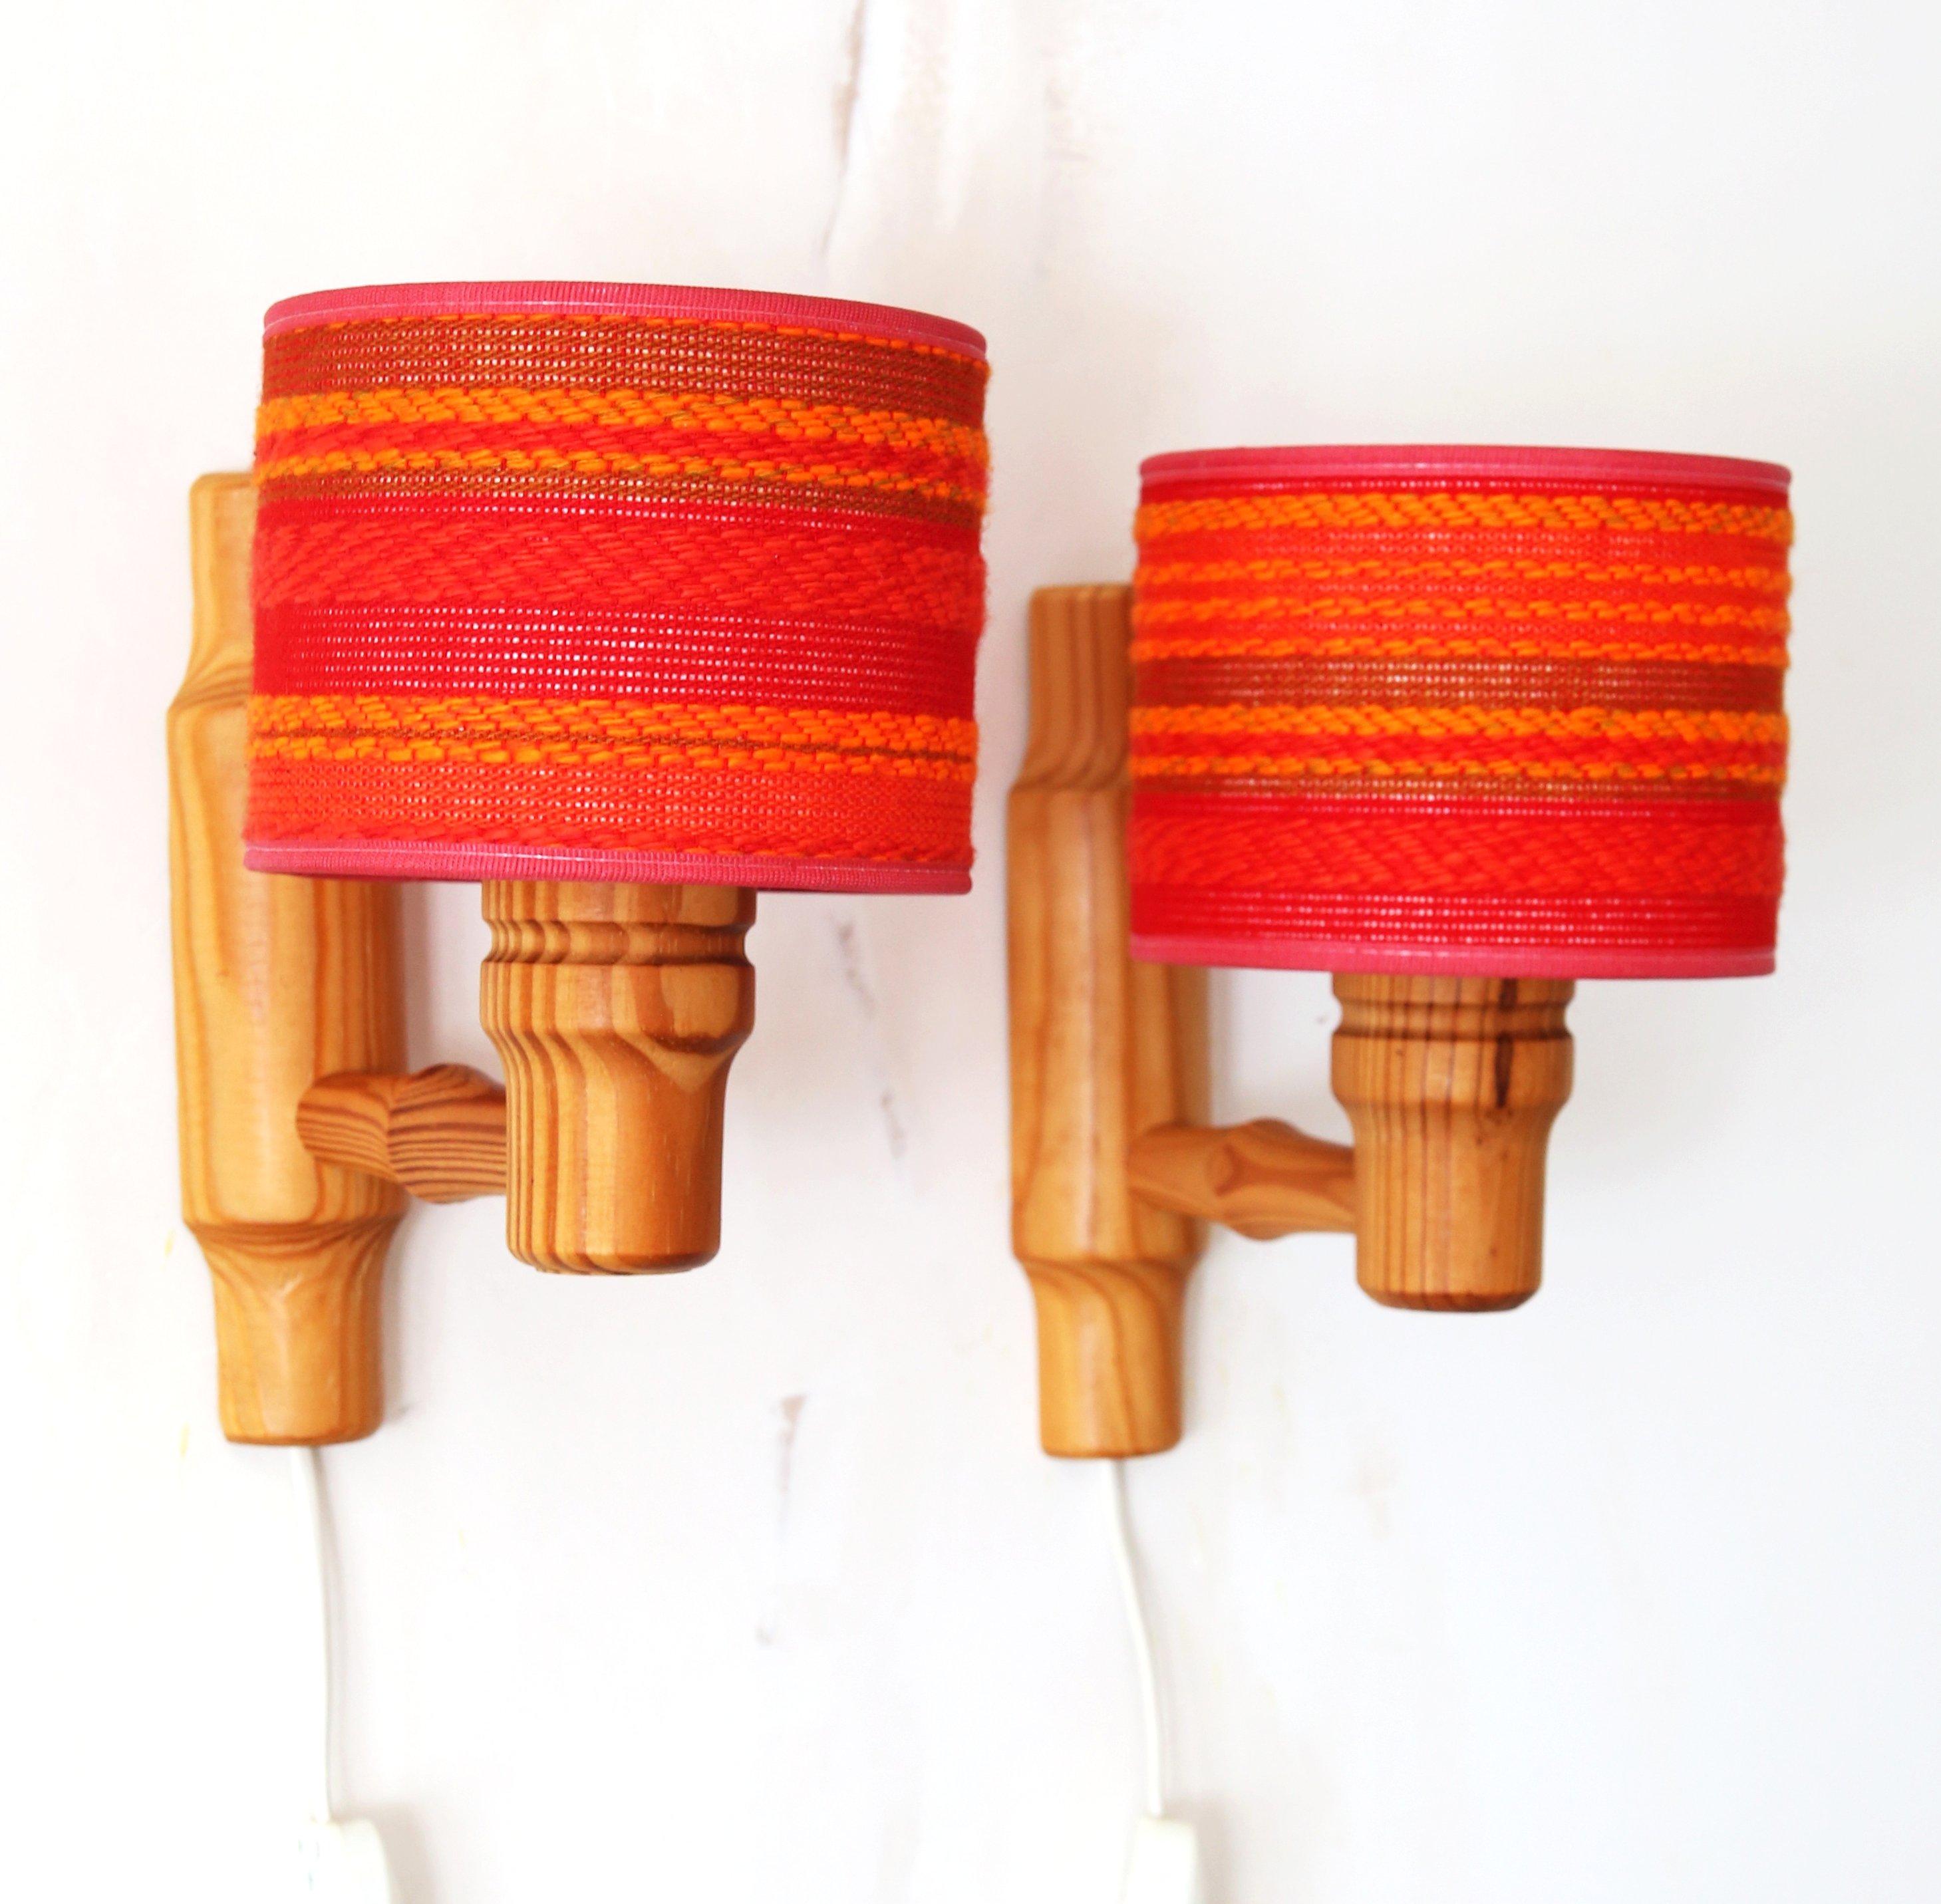 A lovely pair of 70s Danish turned pine wall sconces by Maxam Denmark

The wonderful warmth of the 70s pine fixings contrasts beautifully with the lampshades covered in a heavily woven textured fabric with varying shades of red, orange and pink on